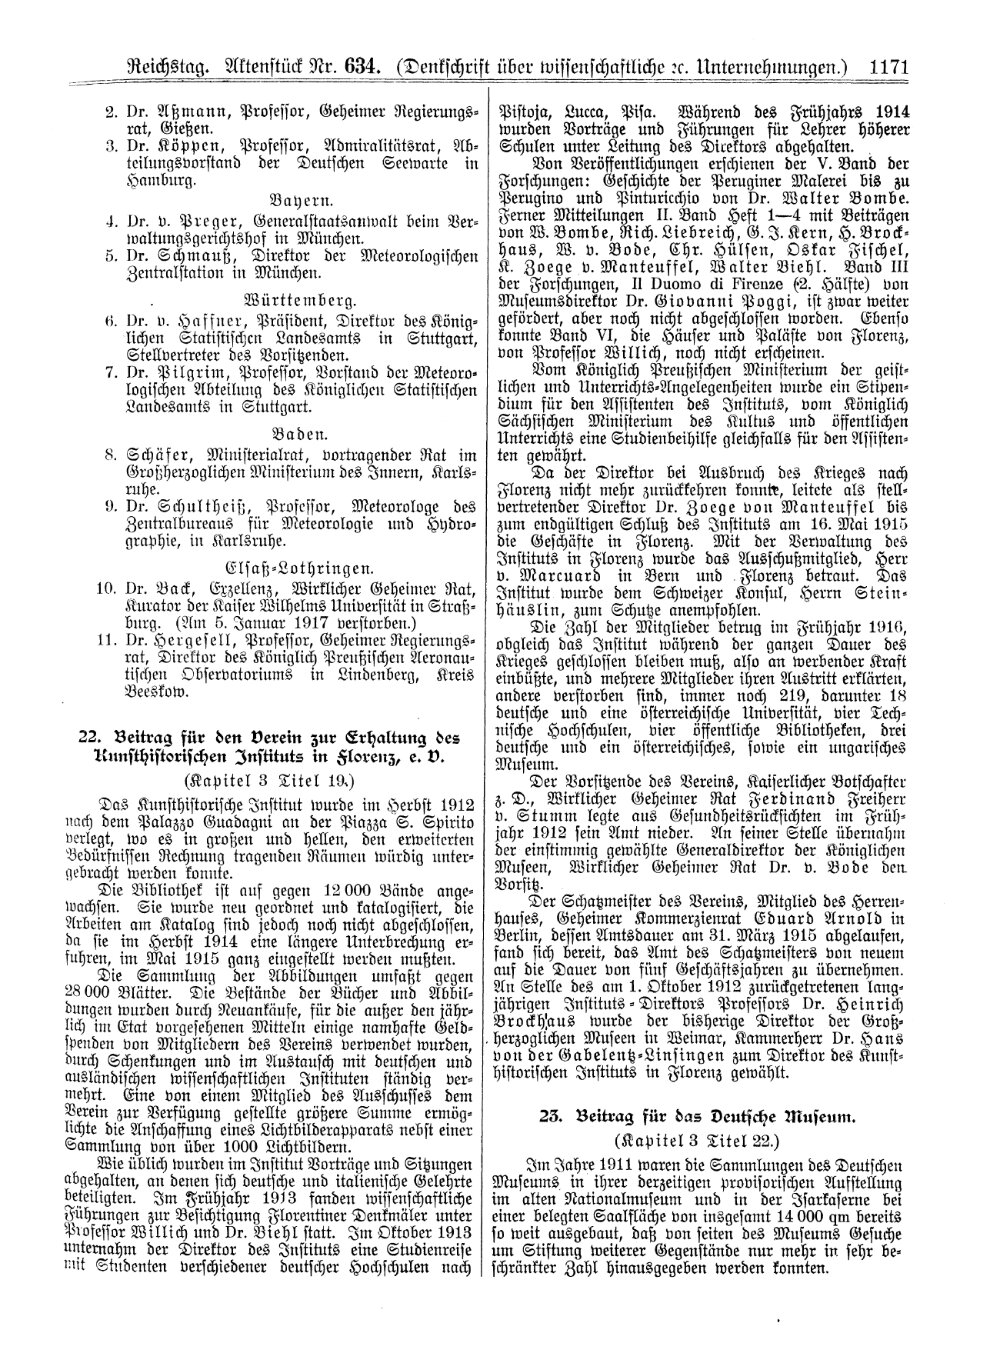 Scan of page 1171